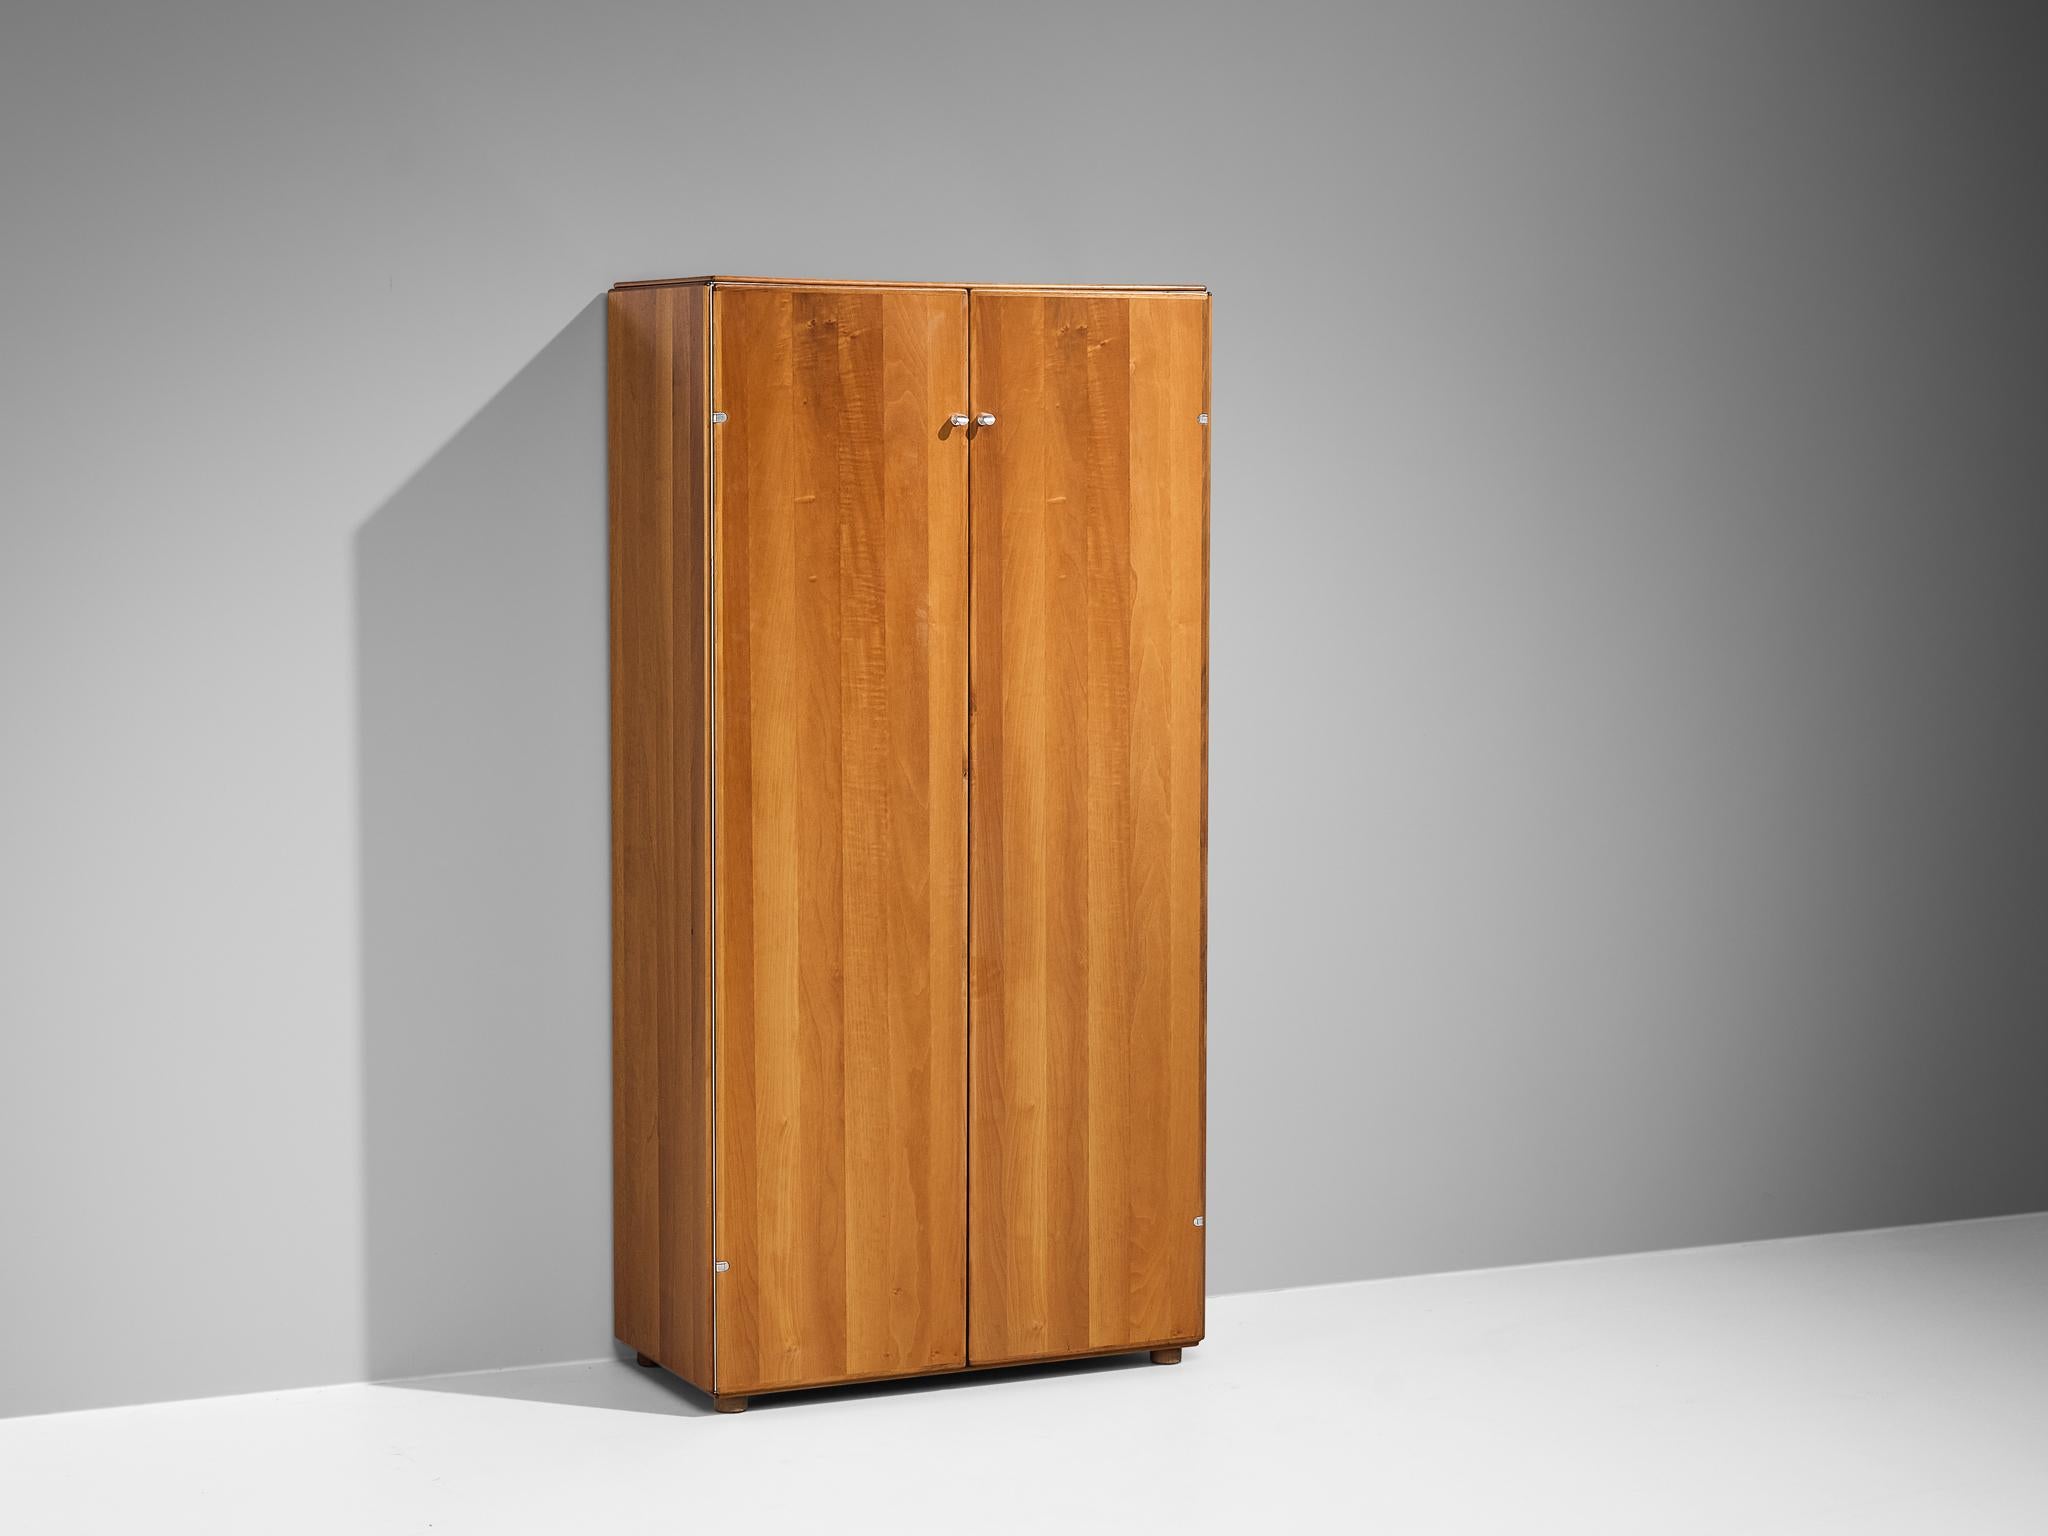 Afra & Tobia Scarpa for Stildomus, 'Torcello' highboard, walnut, aluminum, Italy, 1964

The 'Torcello' model is a rare find and is produced by the Italian company Stildomus, a furniture company that continuously strived in finding the perfect